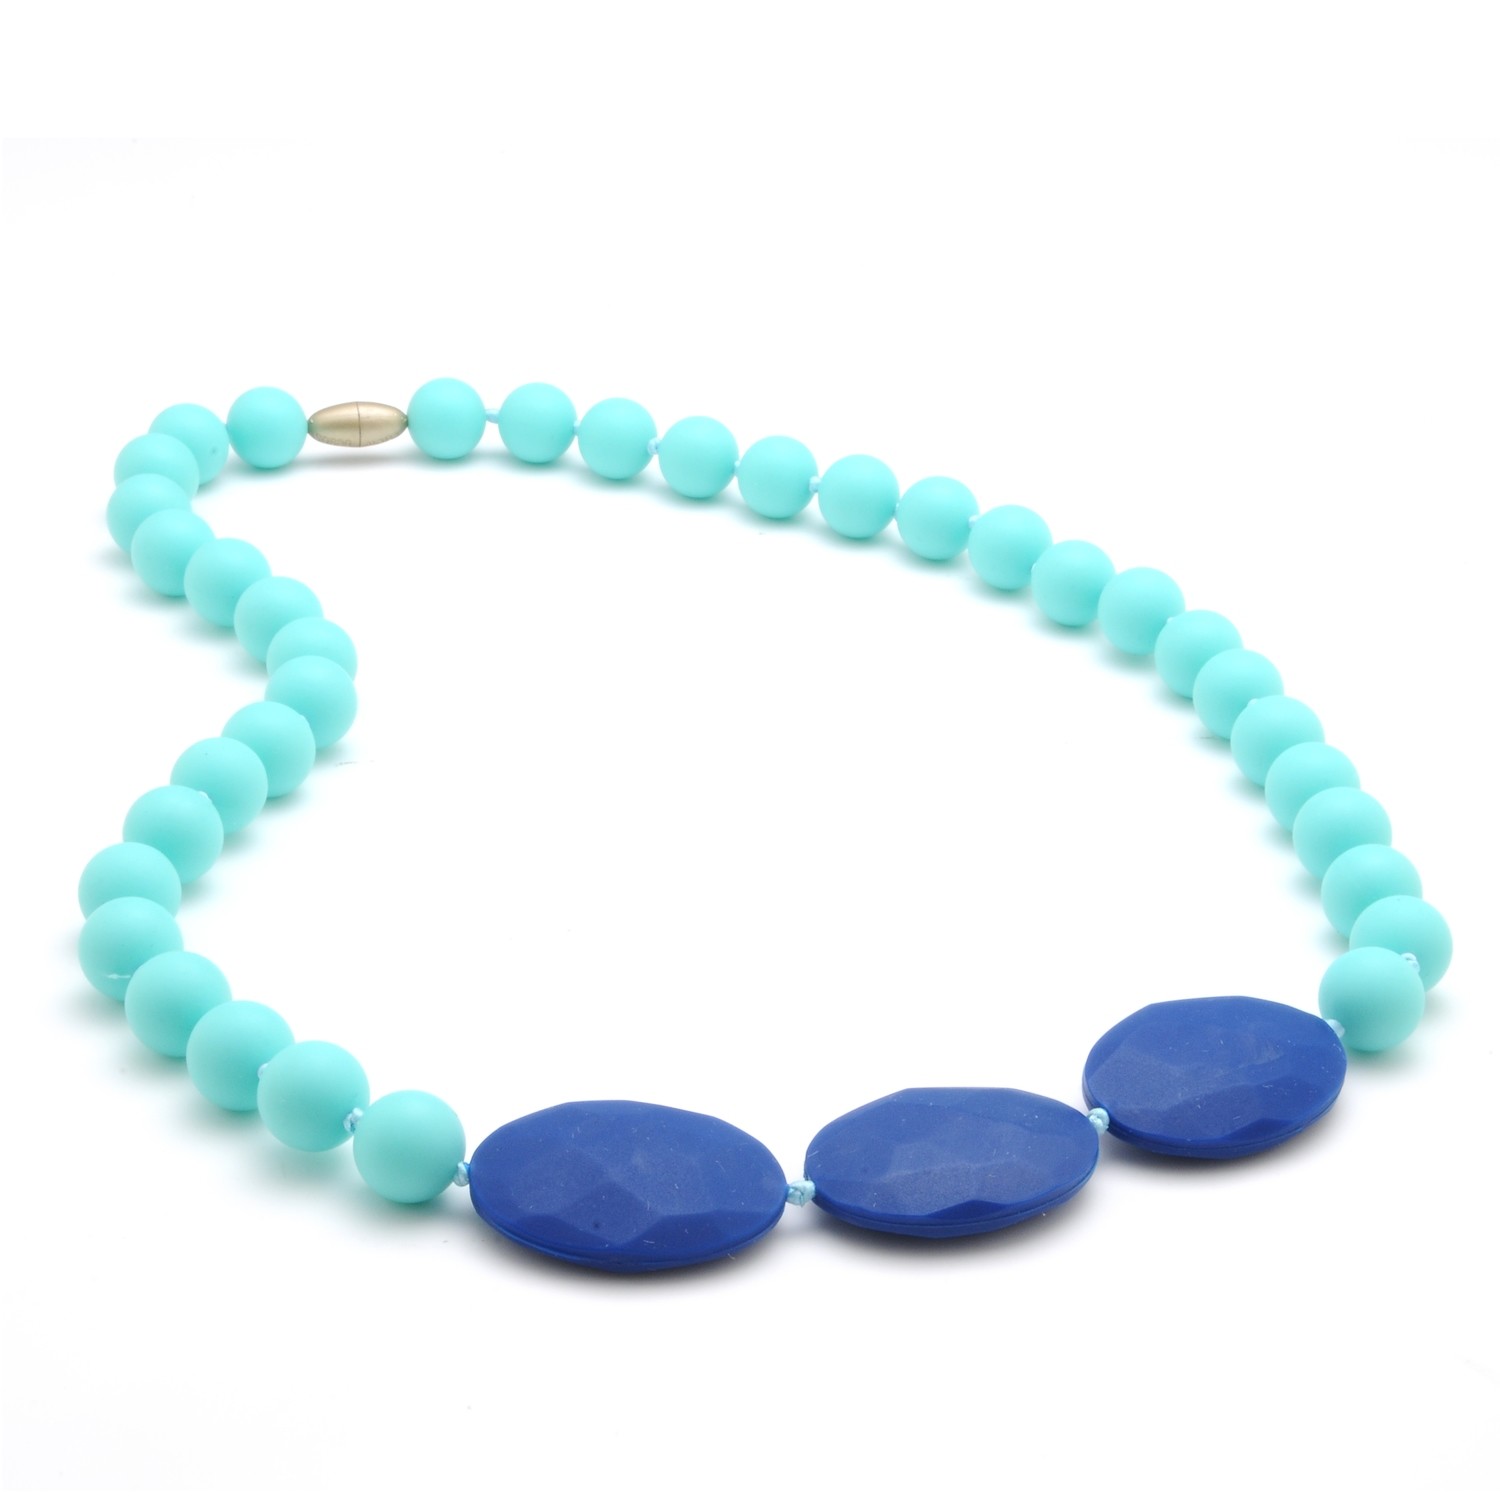 Greenwich Necklace - Turquoise